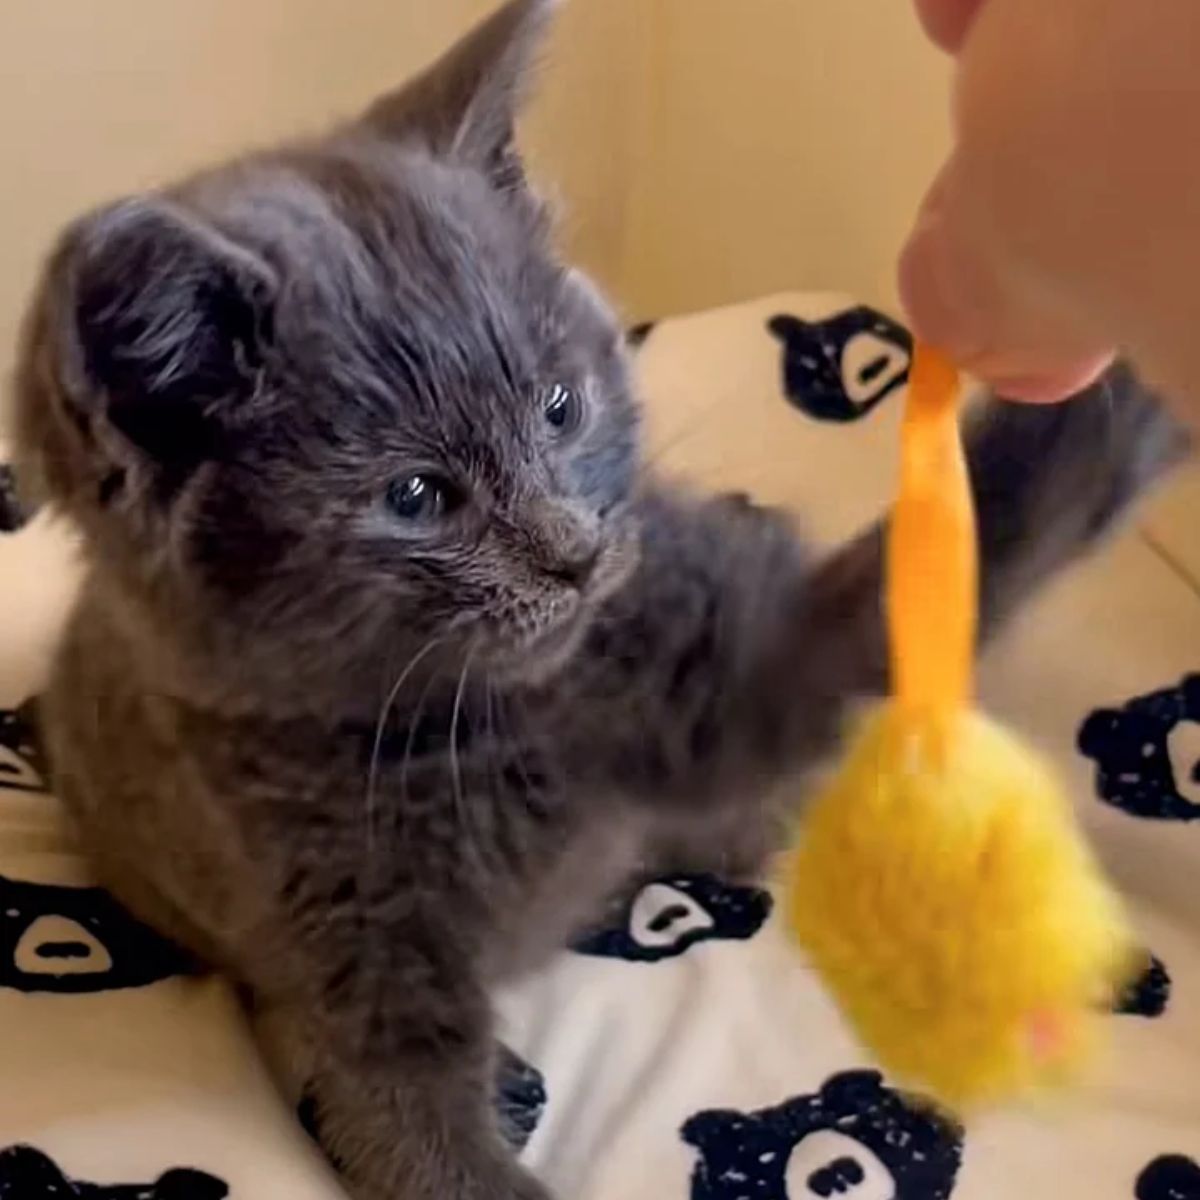 kitten playing with yellow toy